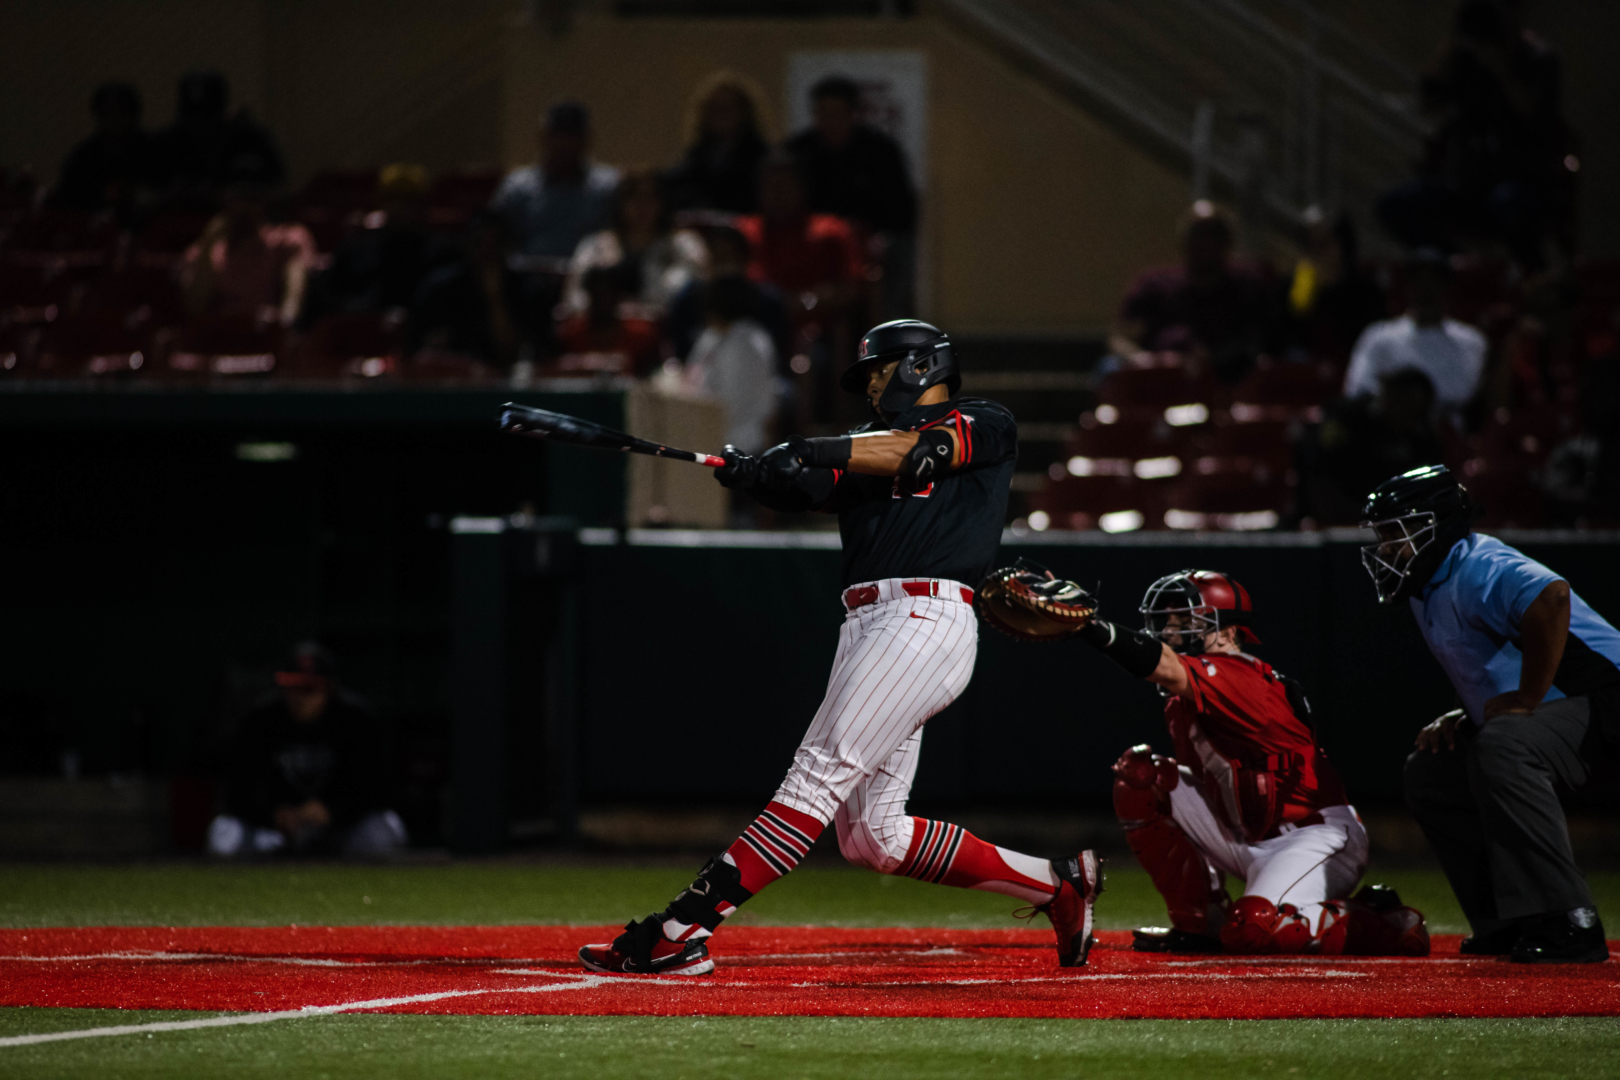 UH baseball fell to 10-6 on the year after dropping its series against Louisiana over the weekend. | James Schillinger/The Cougar